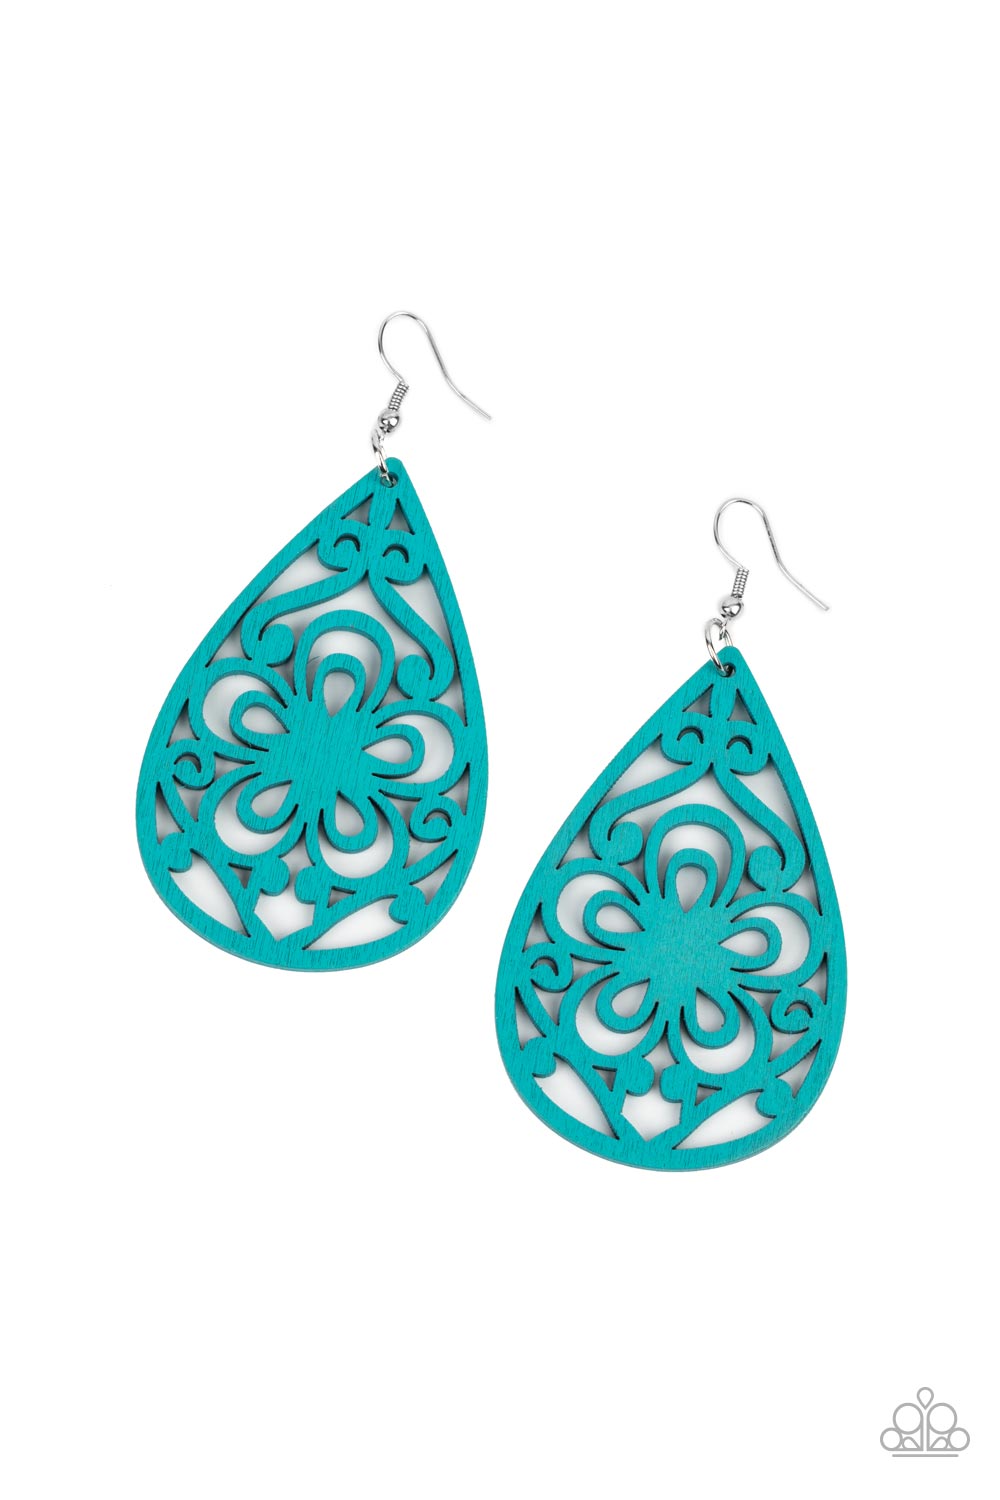 Marine Eden Blue Wood Earrings - Paparazzi Accessories- lightbox - CarasShop.com - $5 Jewelry by Cara Jewels